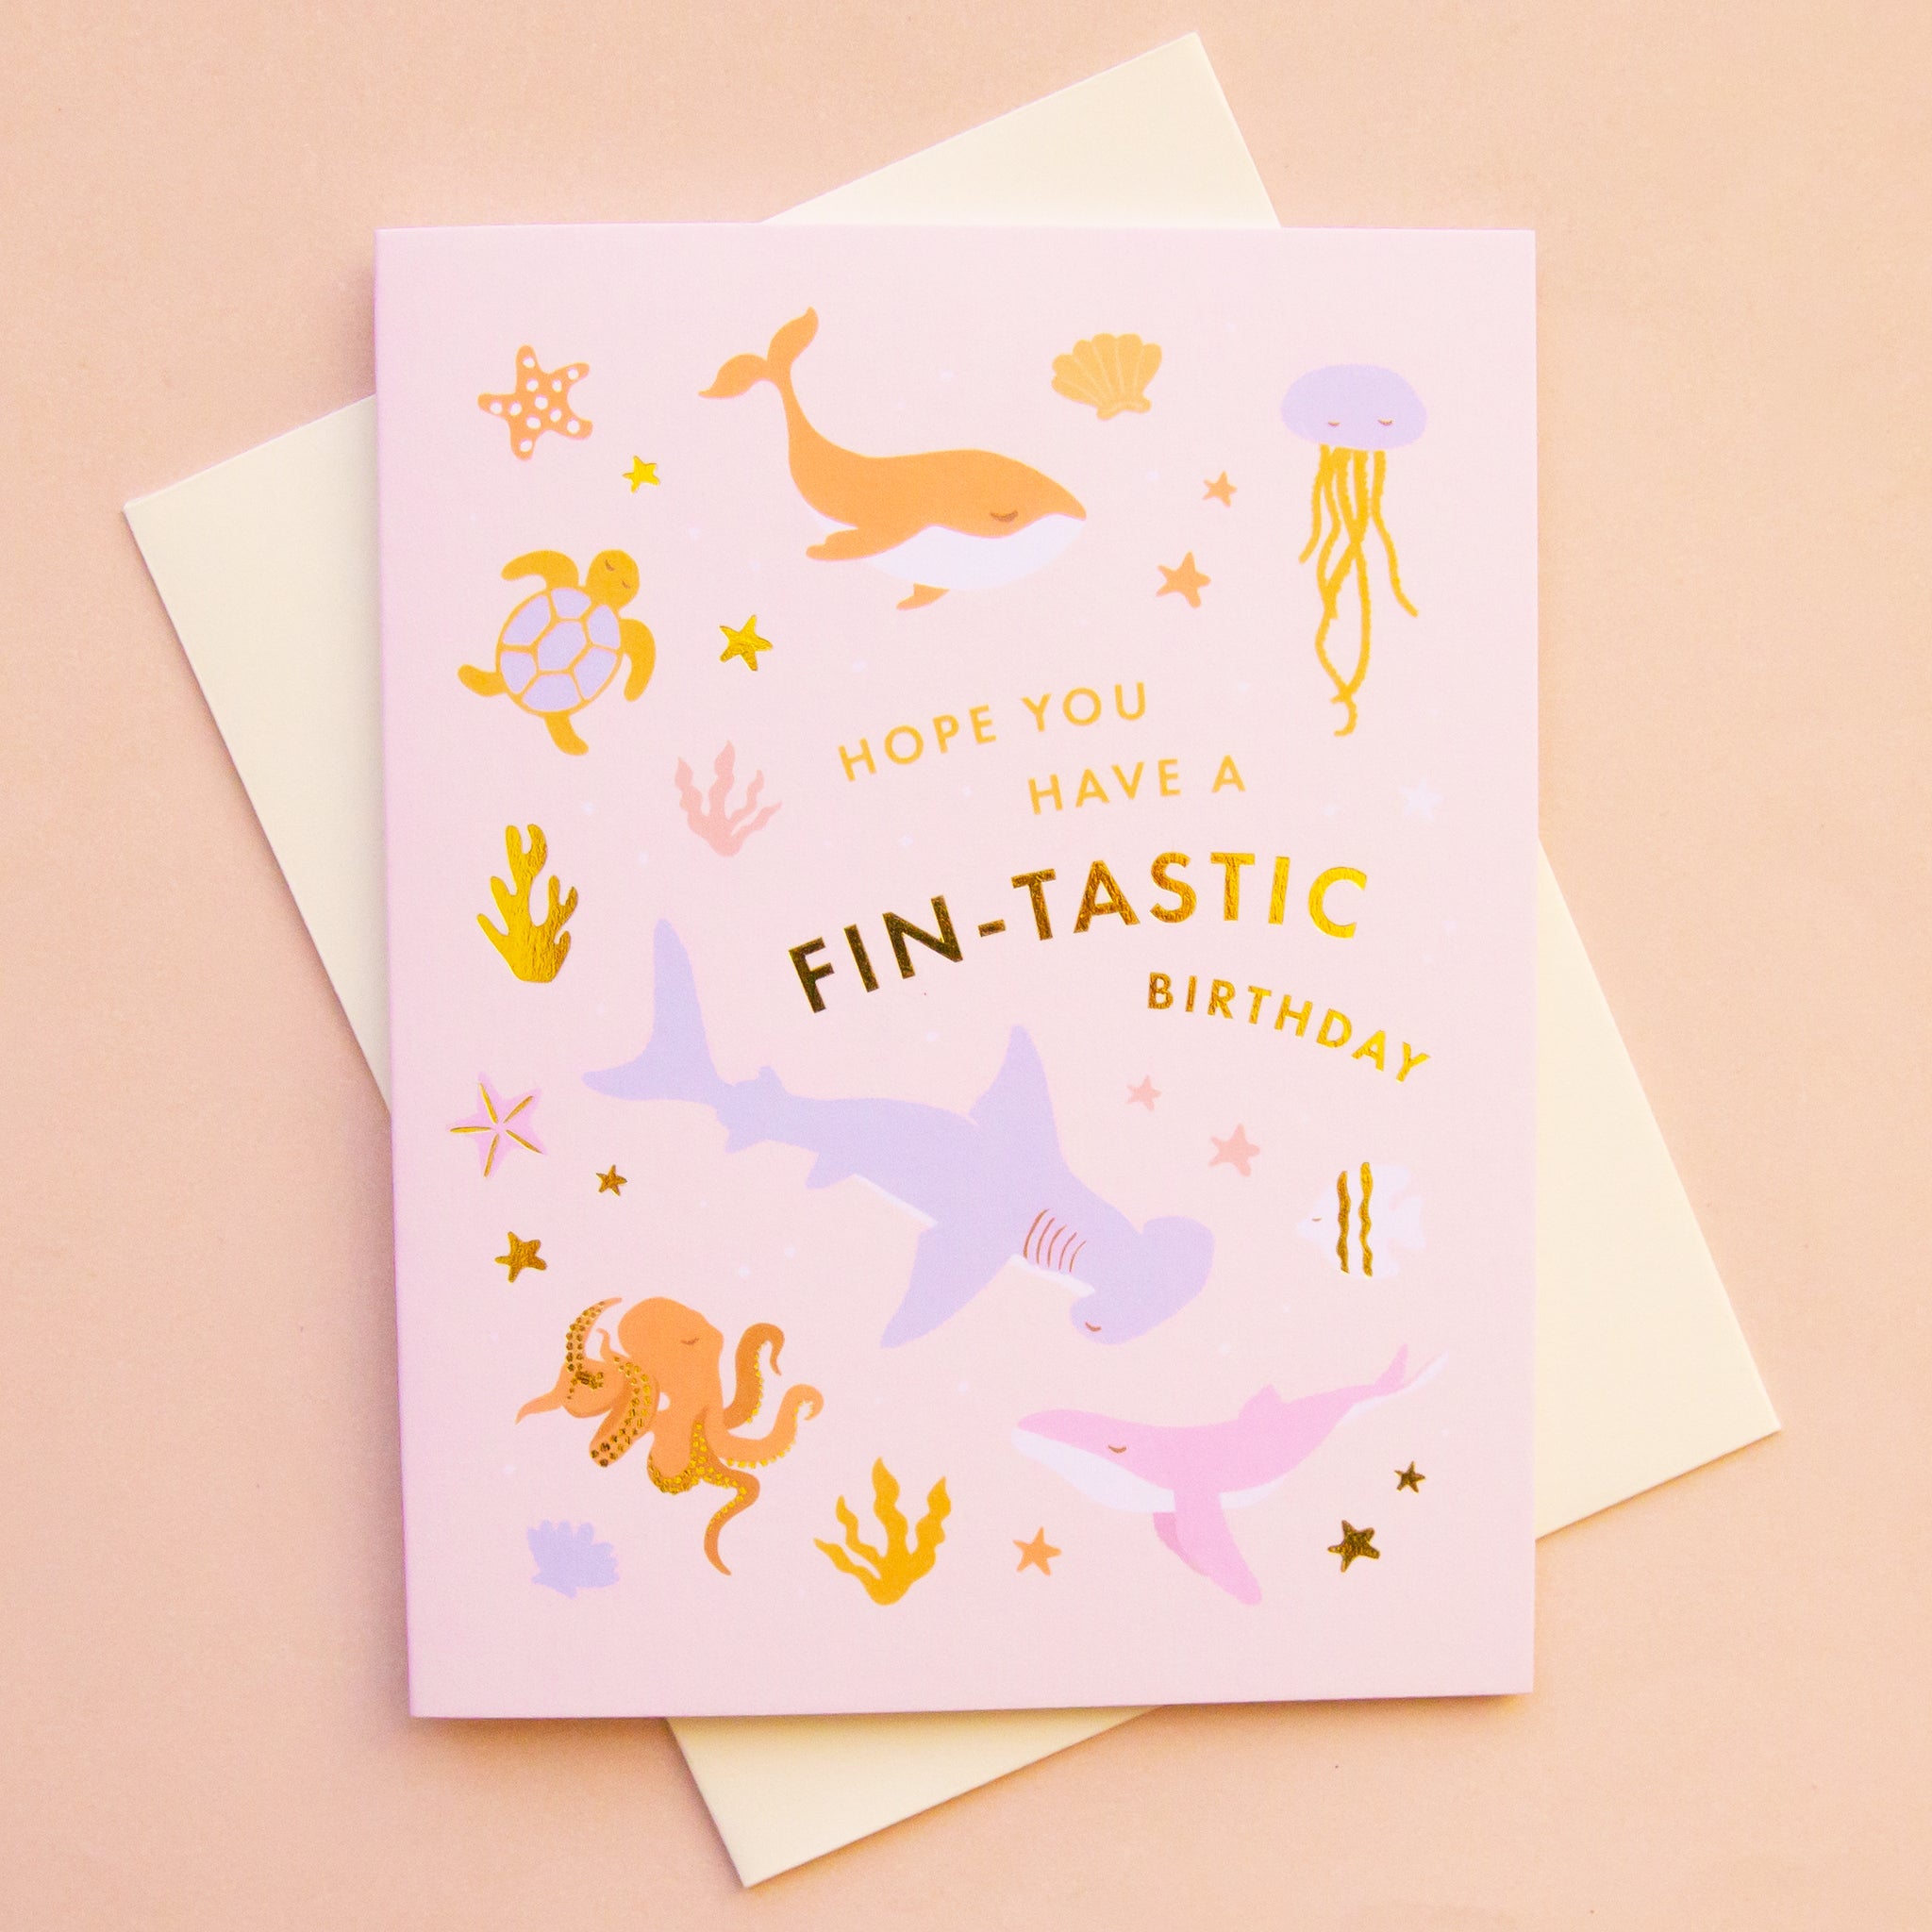 On a pink background is a pink card with ocean animals on it and text that reads, "Hope Your Have A Fin-Tastic Birthday".